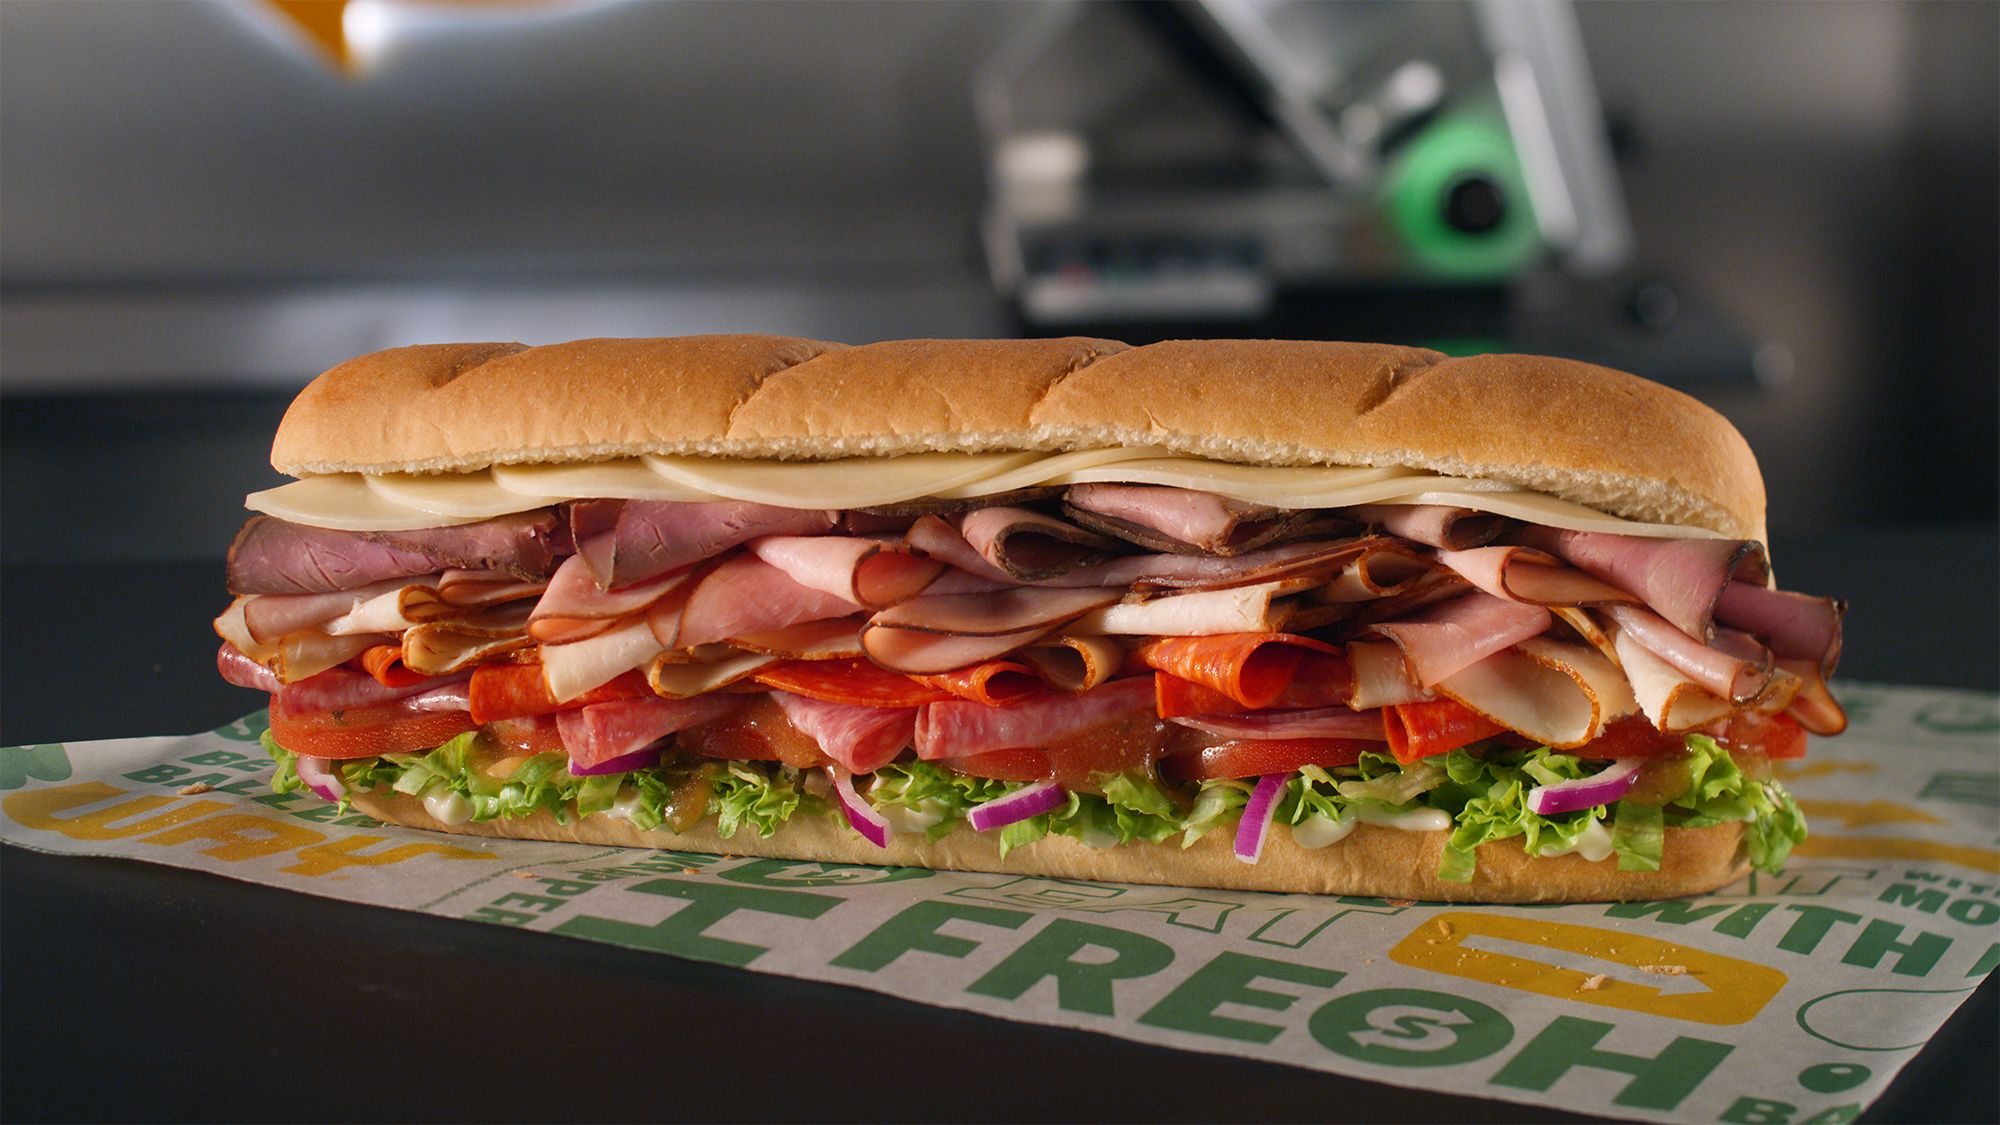 To undercut its fast-growing rivals, Subway is making a big change to its meats. The chain’s roug...